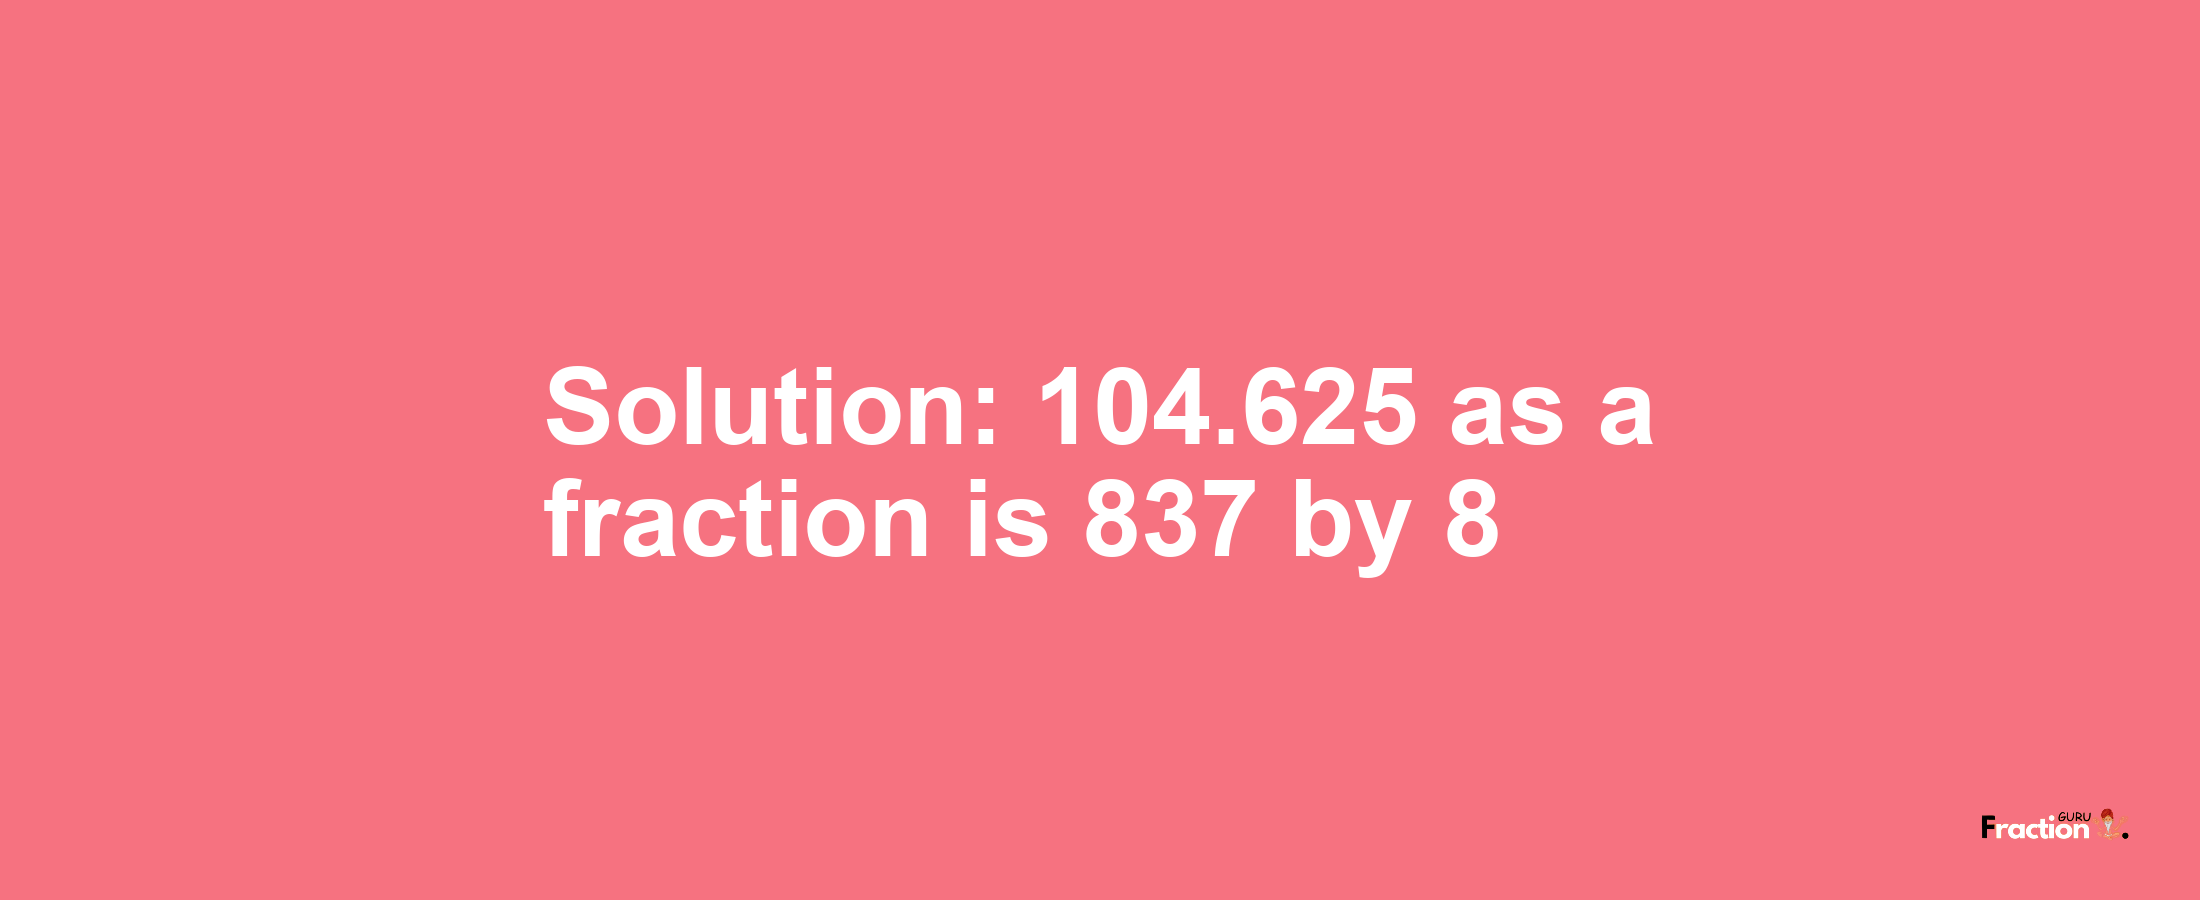 Solution:104.625 as a fraction is 837/8